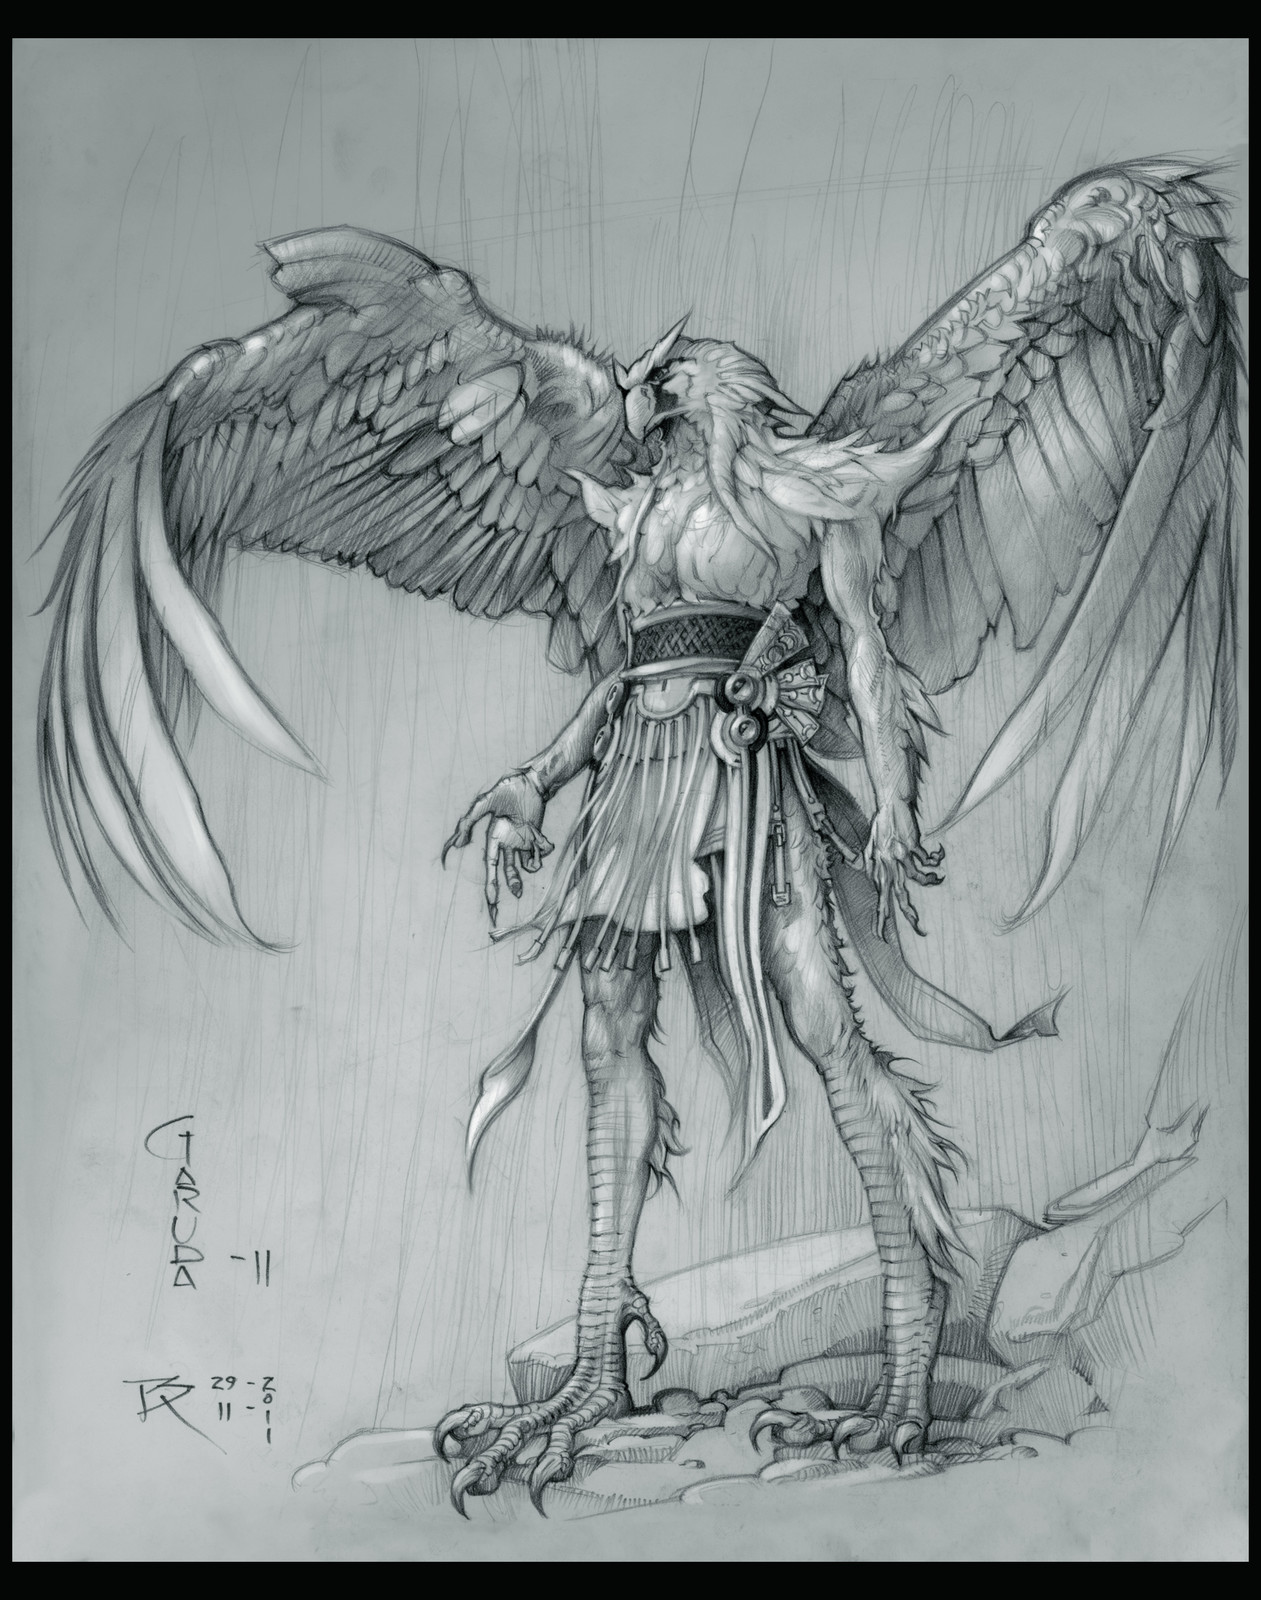 GARUDA 11
 -Pencil  sketch, with  Photoshop touch up